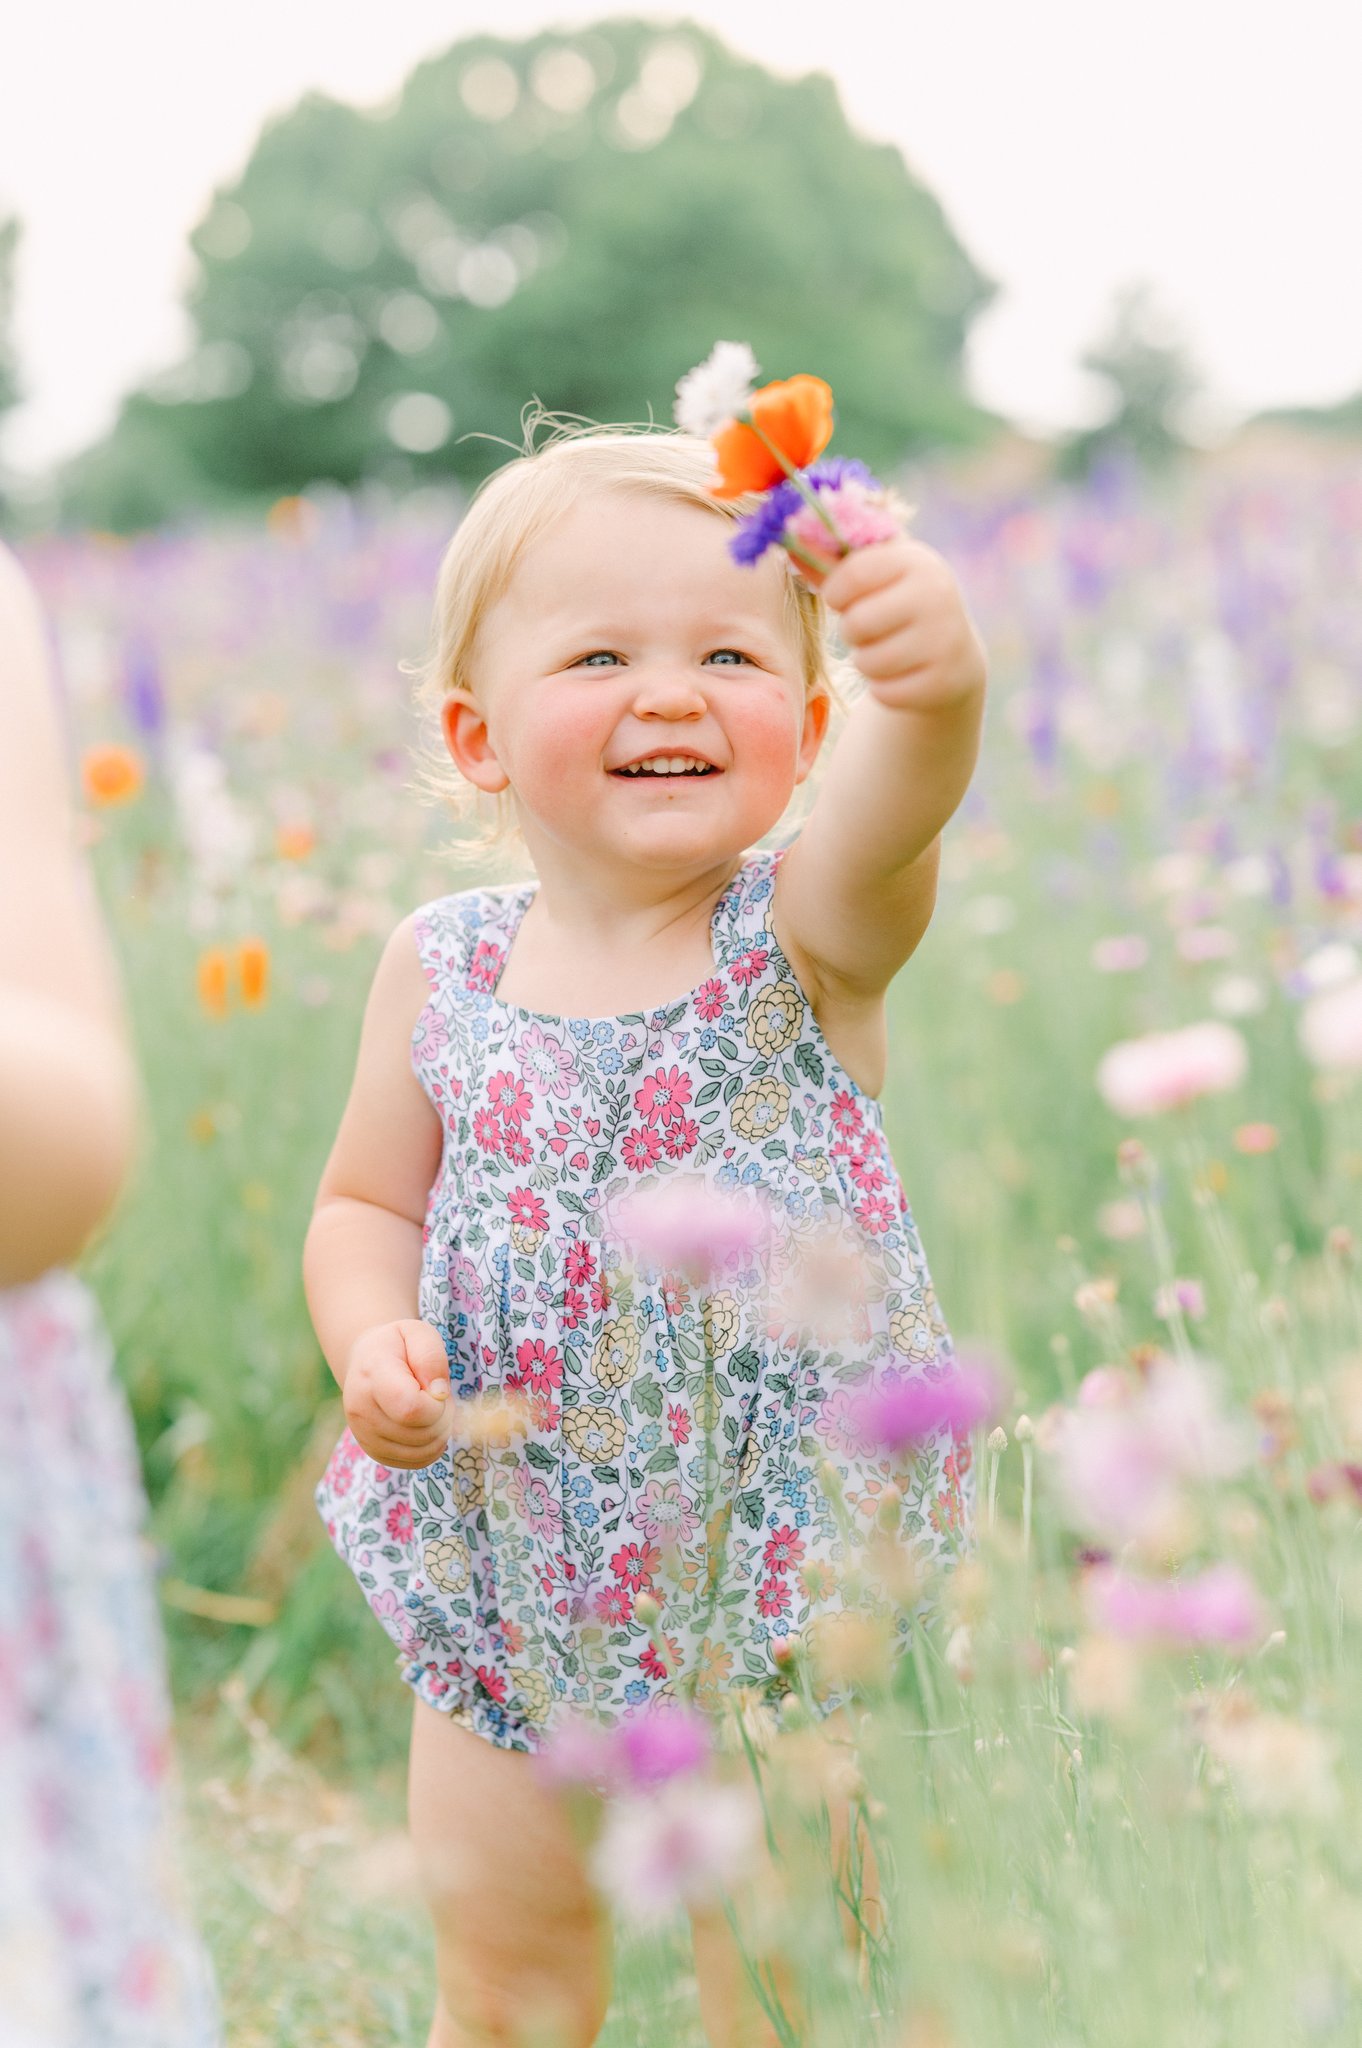 Little girl holding up a flower and smiling.